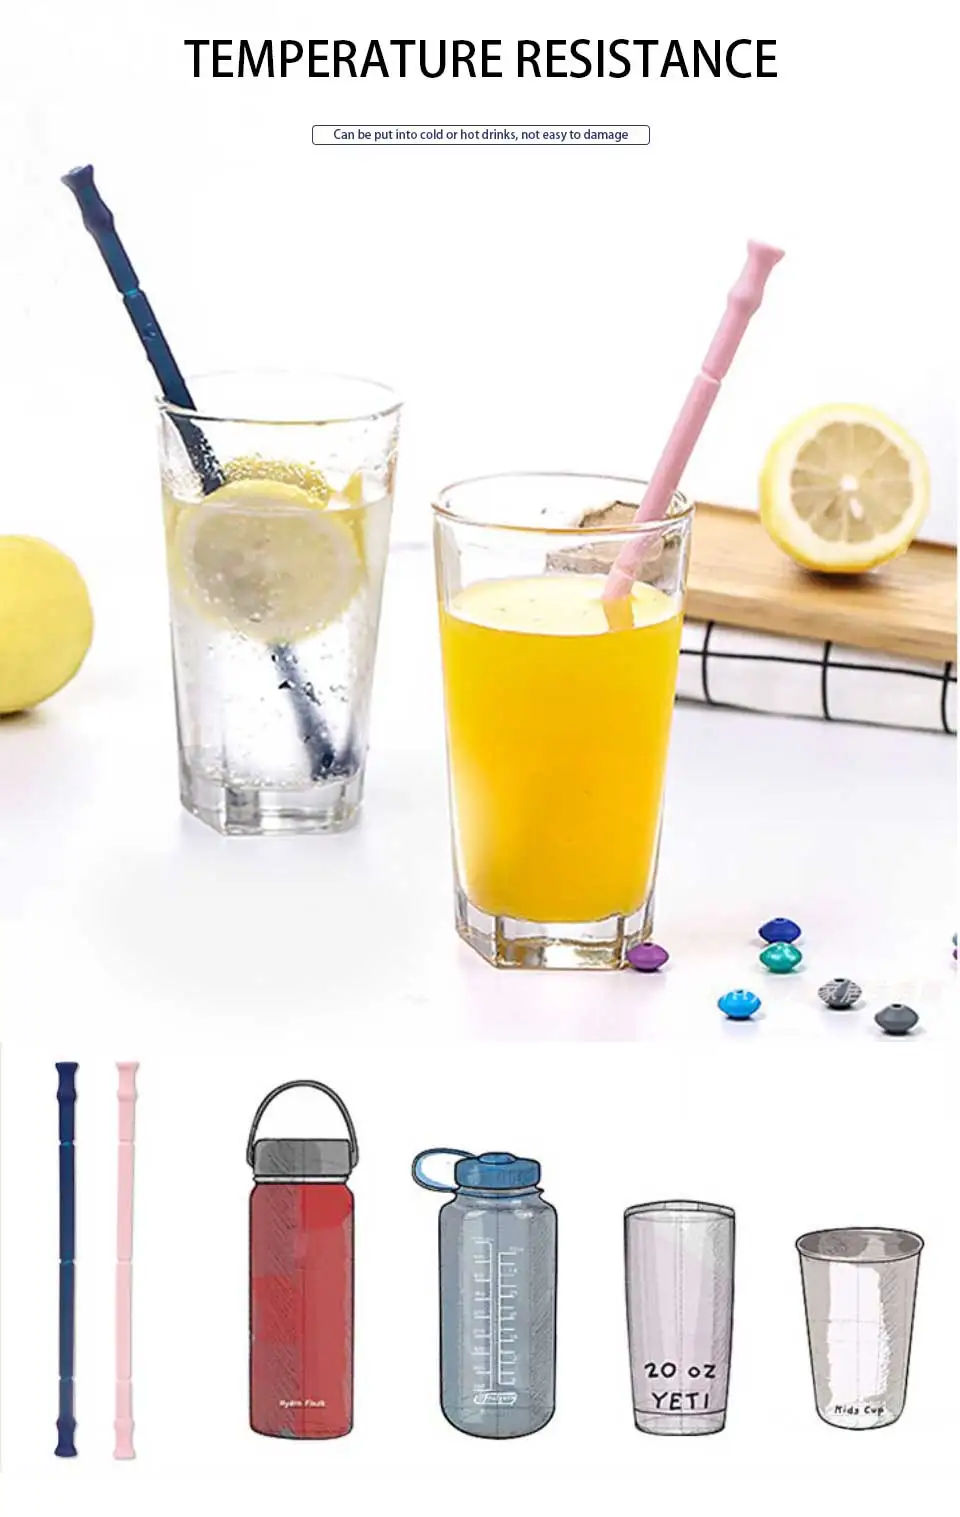 Collapsible Reusable Straw Foldable Silicone Straw Drinking Straws With Cleaning Brush Set for Travel Home Office Bar Drinks